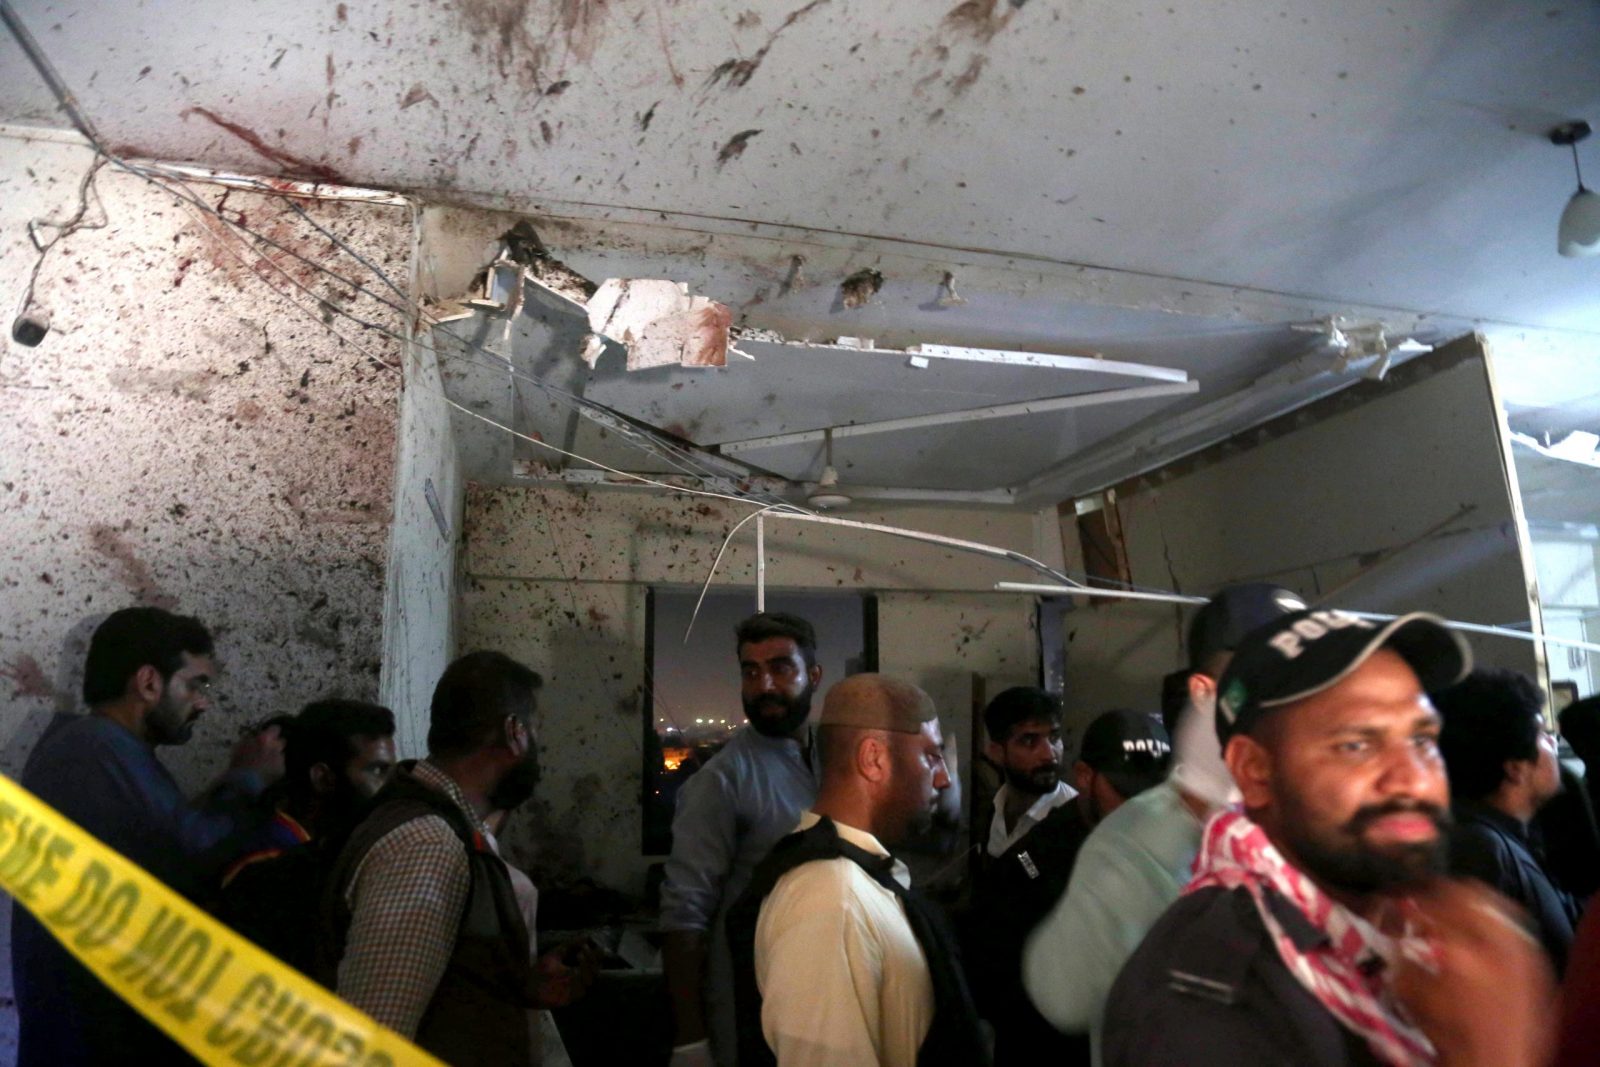 epa10473527 Pakistani security officials inspect the scene of an attack by gunmen targeting the office of the Karachi Police chief, in Karachi, Pakistan, 17 February 2023. According to police, at least three police officials were killed and 11 were injured after gunmen attacked the office of the Karachi police chief located on Main Sharea Faisal, with an operation currently underway.  EPA/REHAN KHAN